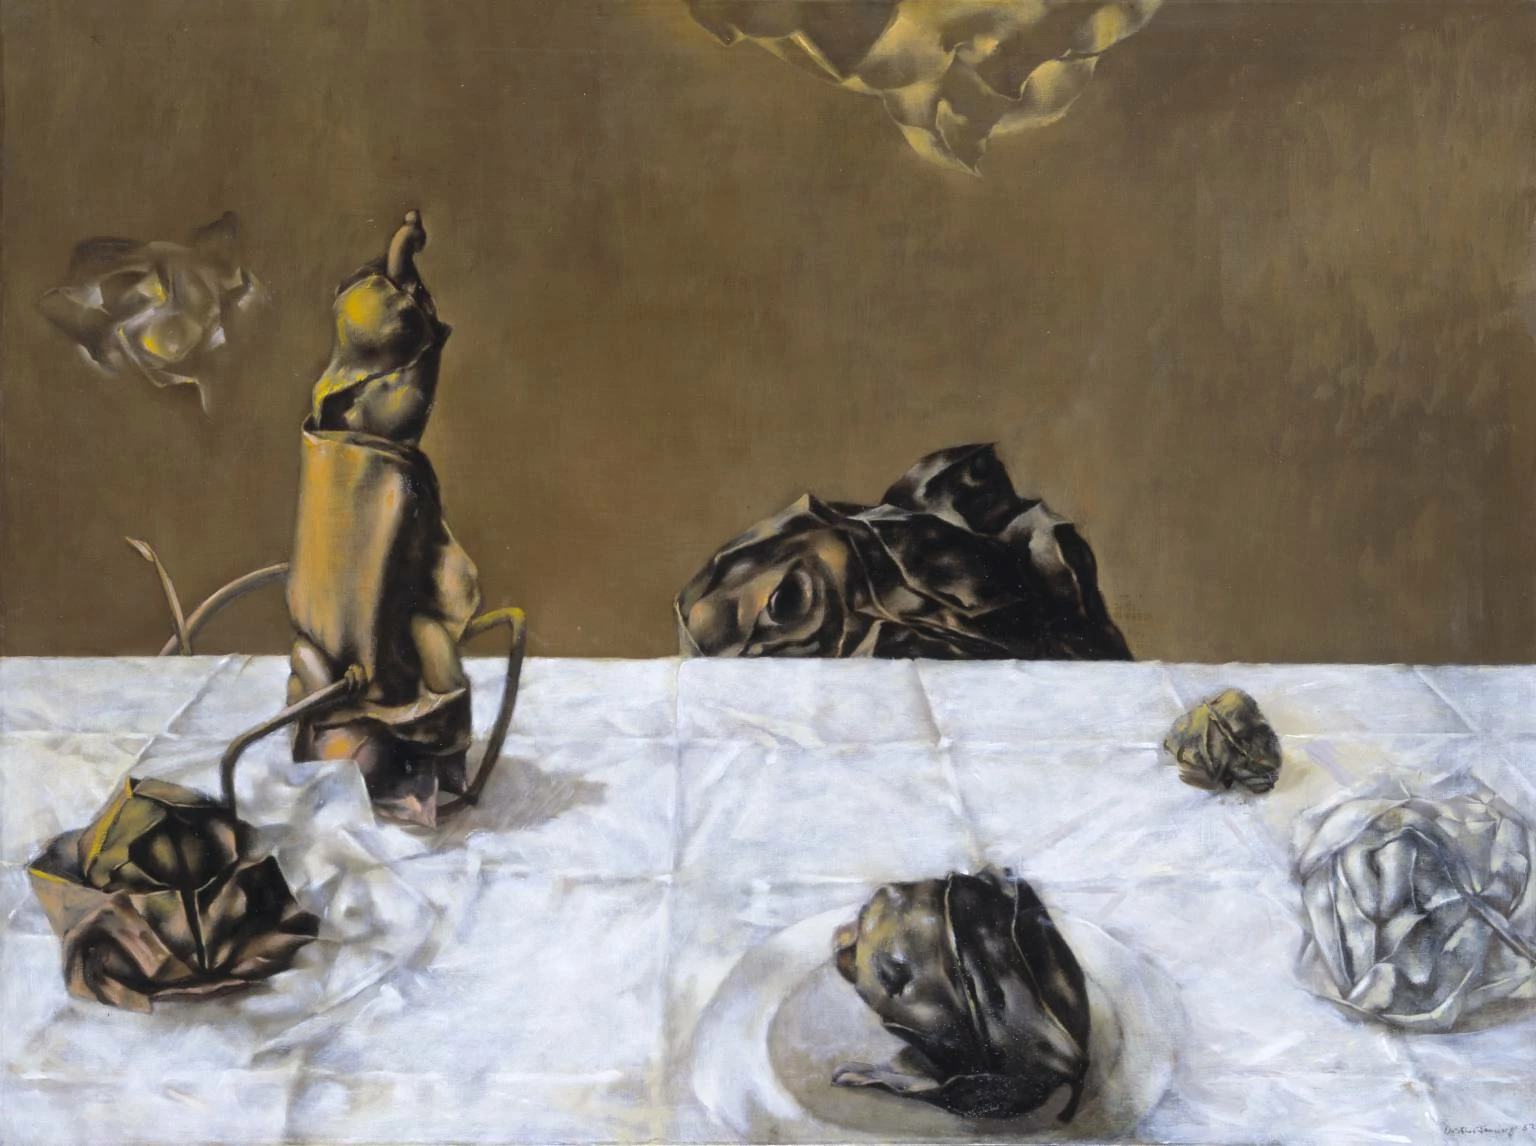 Some Roses and Their Phantoms, Dorothea Tanning